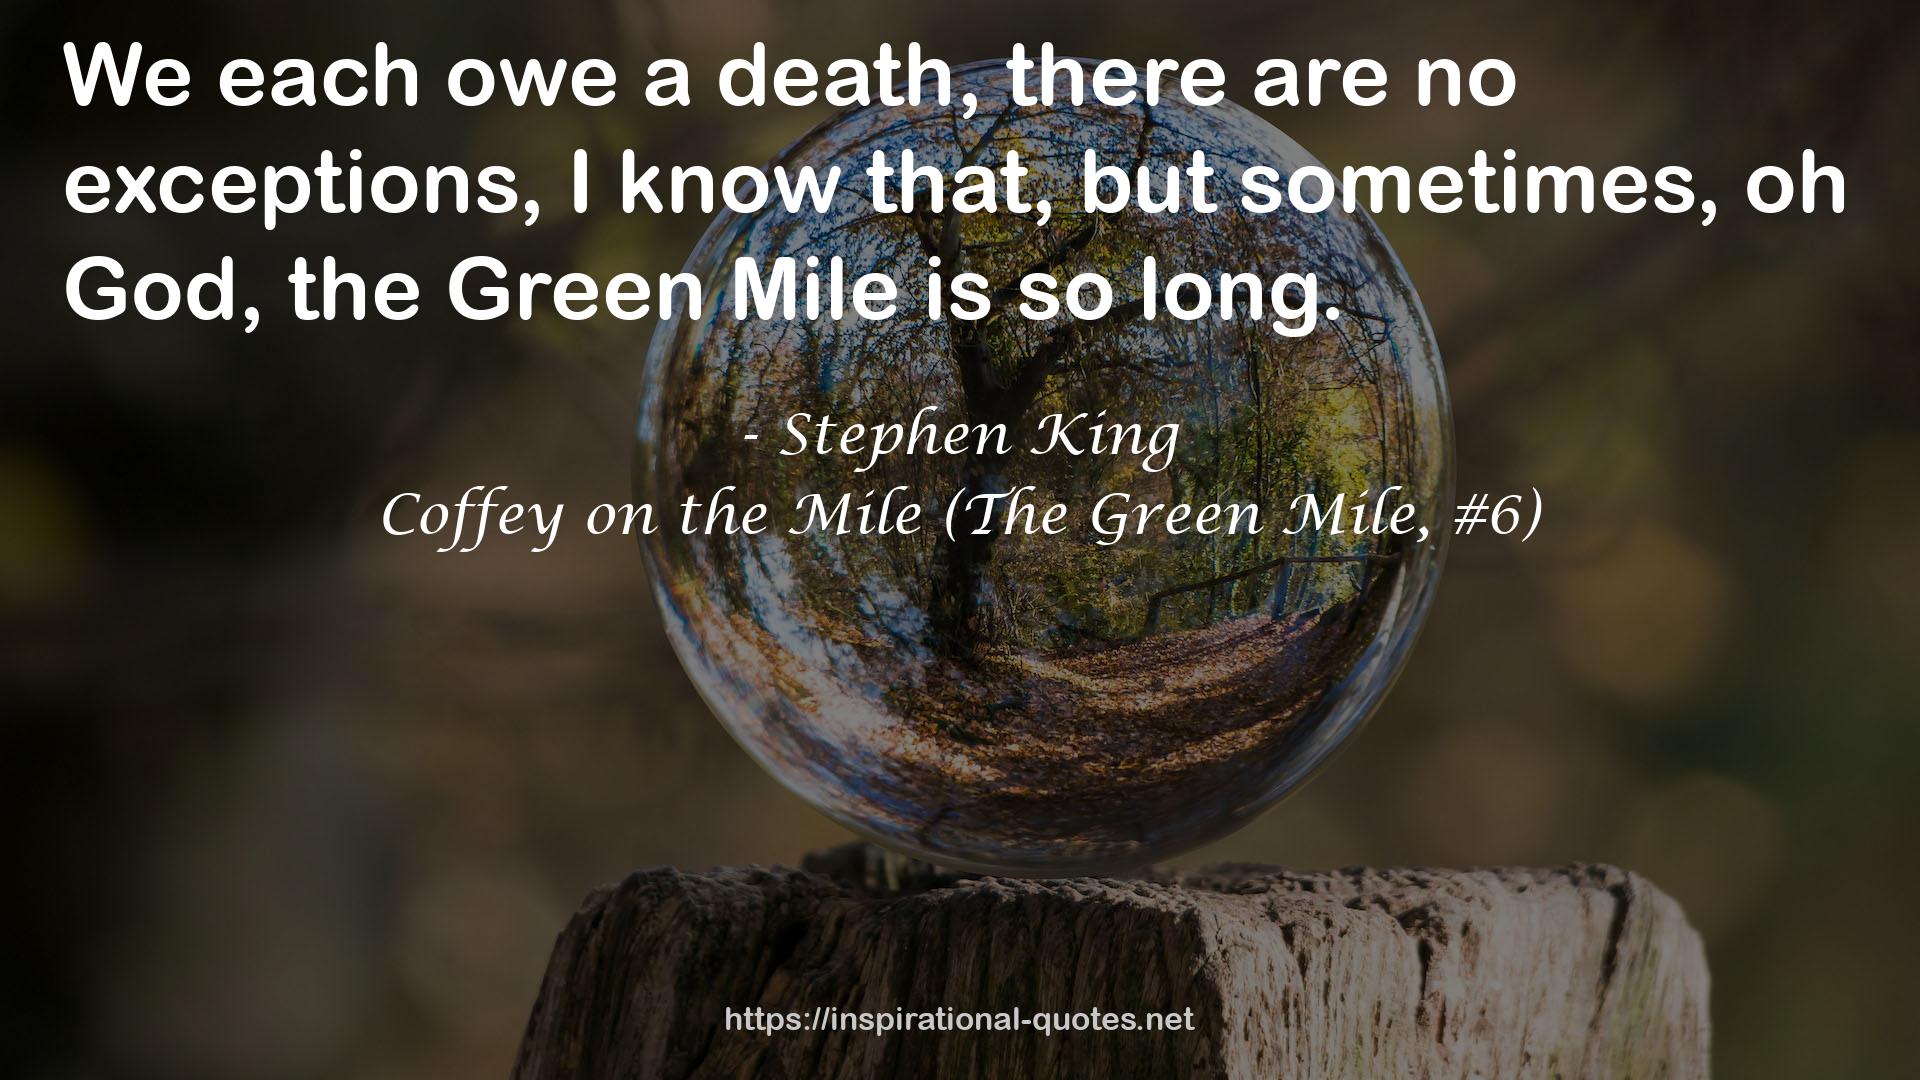 Coffey on the Mile (The Green Mile, #6) QUOTES